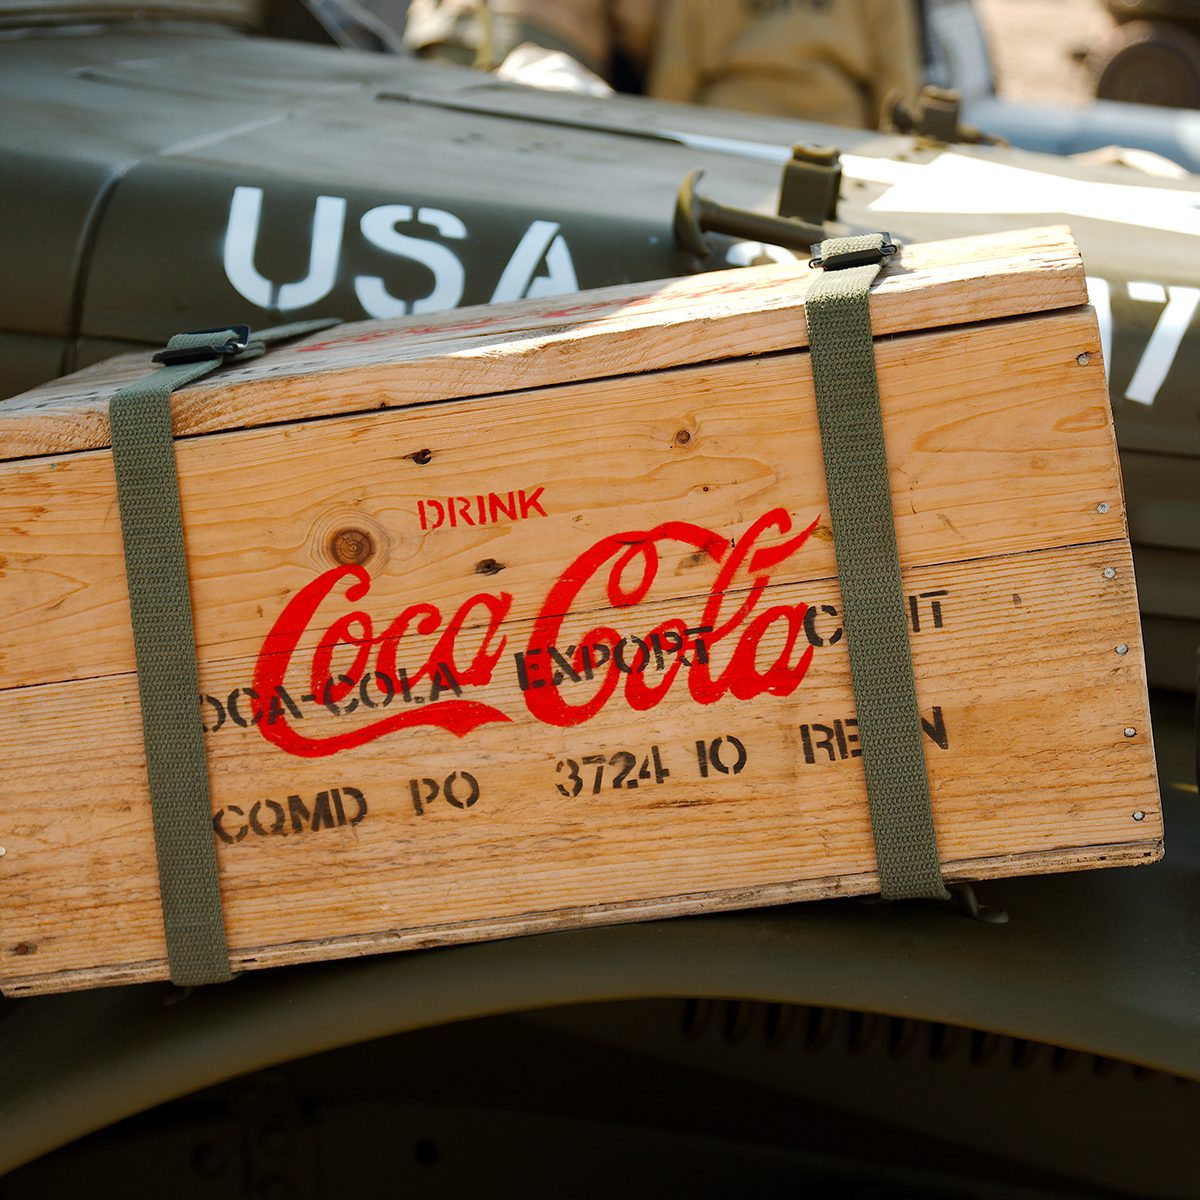 Saunton, Devon, UK - 15th June 2019: World War 2 reenactment (D-day) weekend. A period WW2 wooden crate depicting Coca Cola attached to the side of a period WW2 vehicle